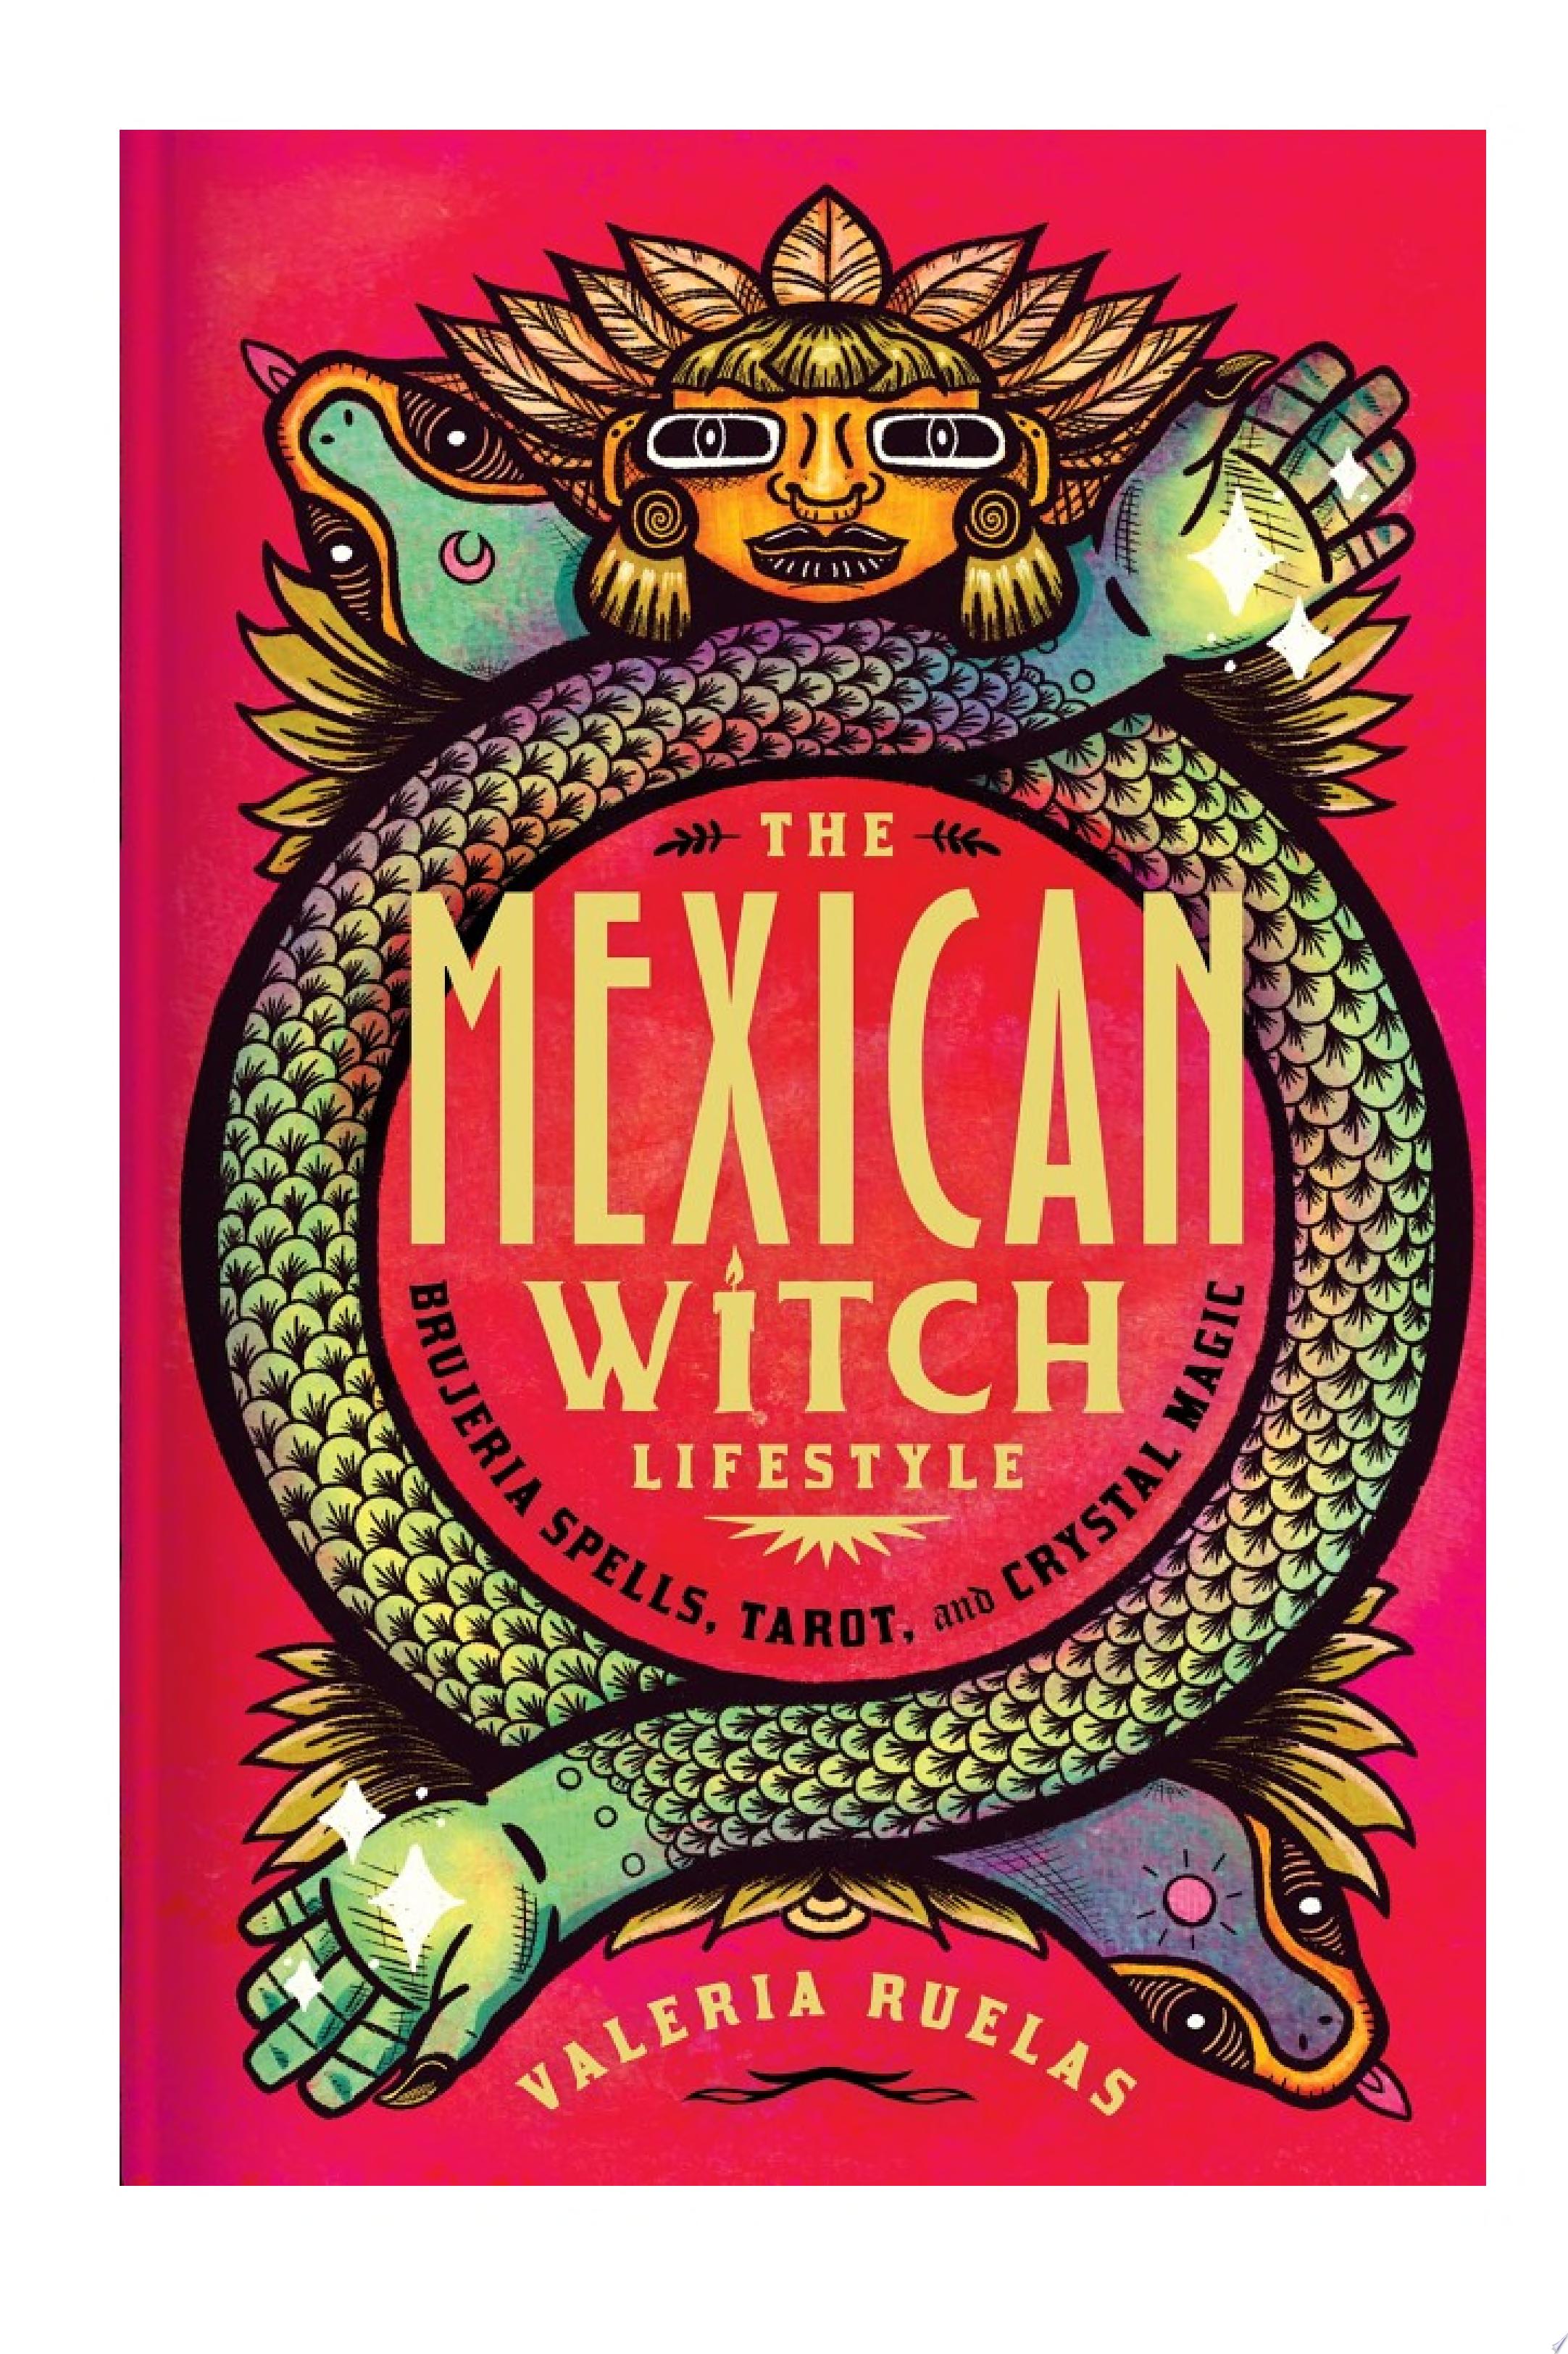 Image for "The Mexican Witch Lifestyle"